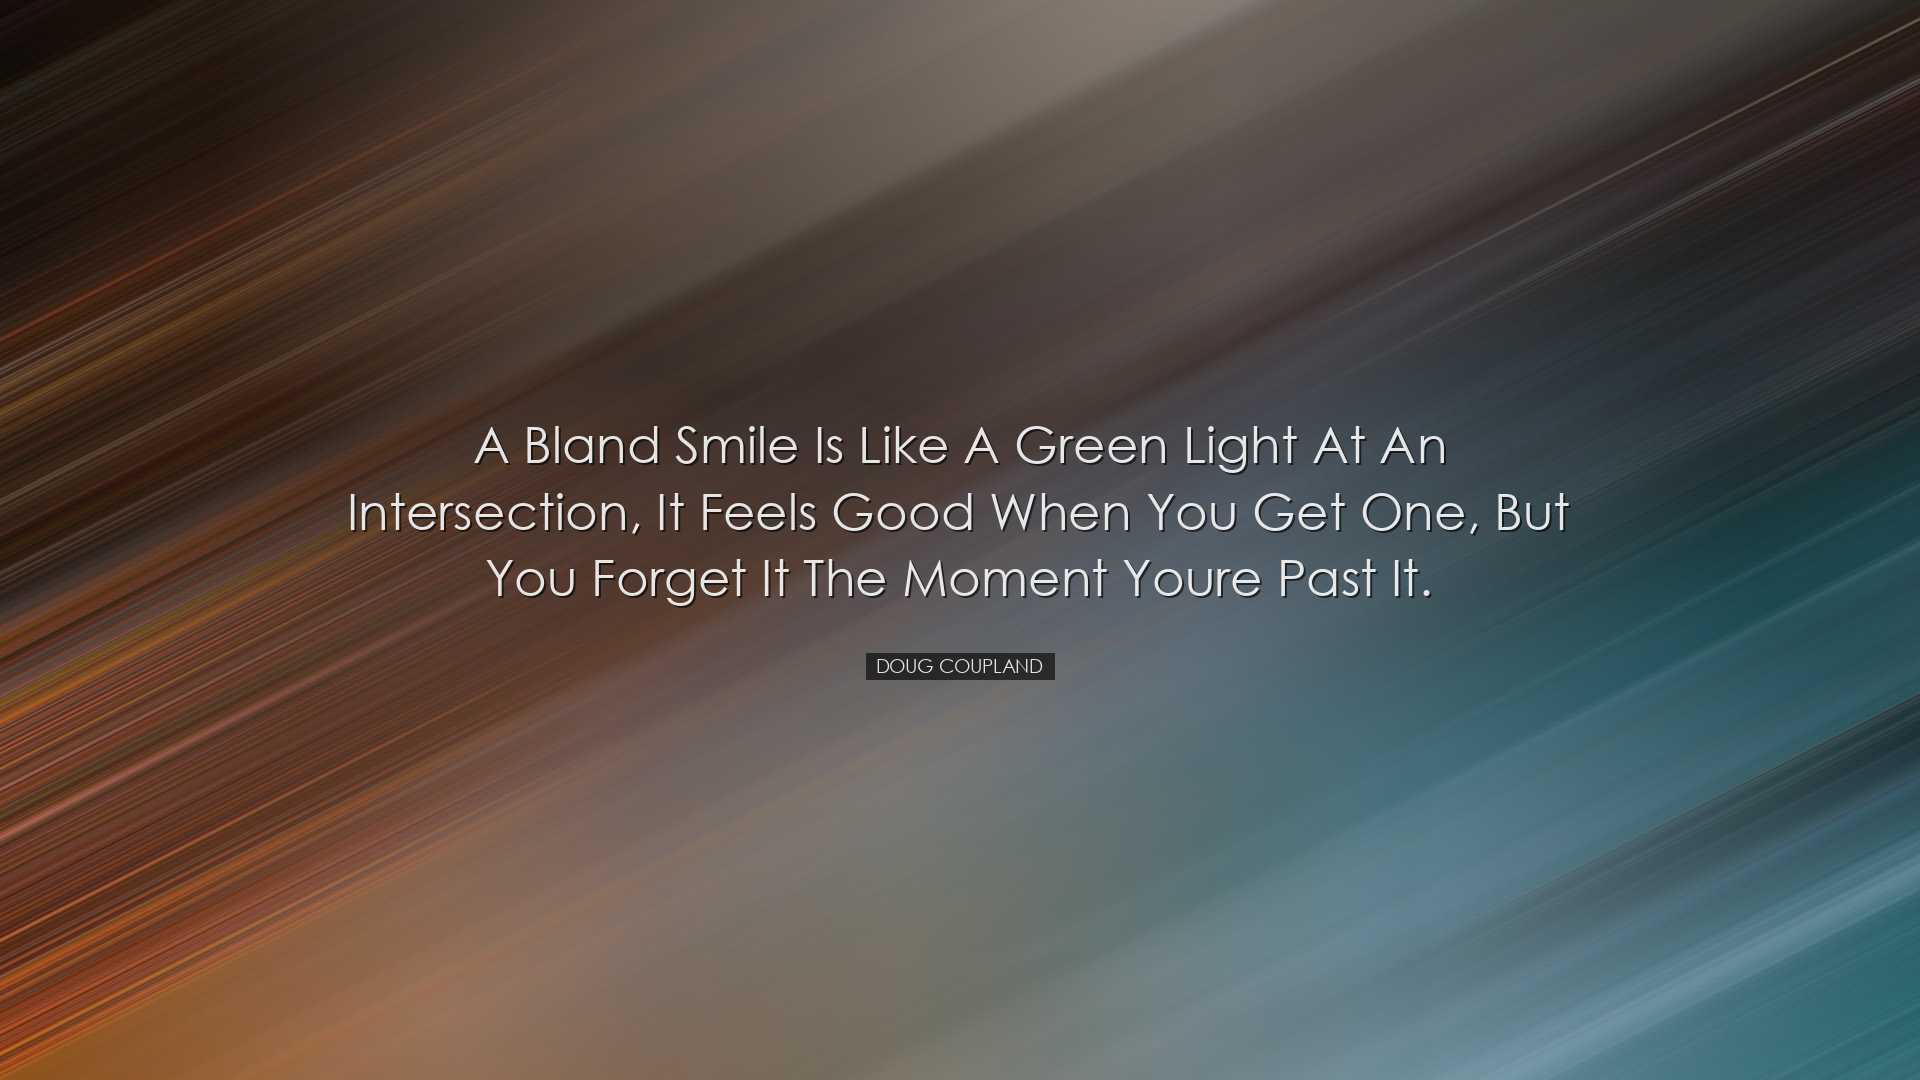 A bland smile is like a green light at an intersection, it feels g